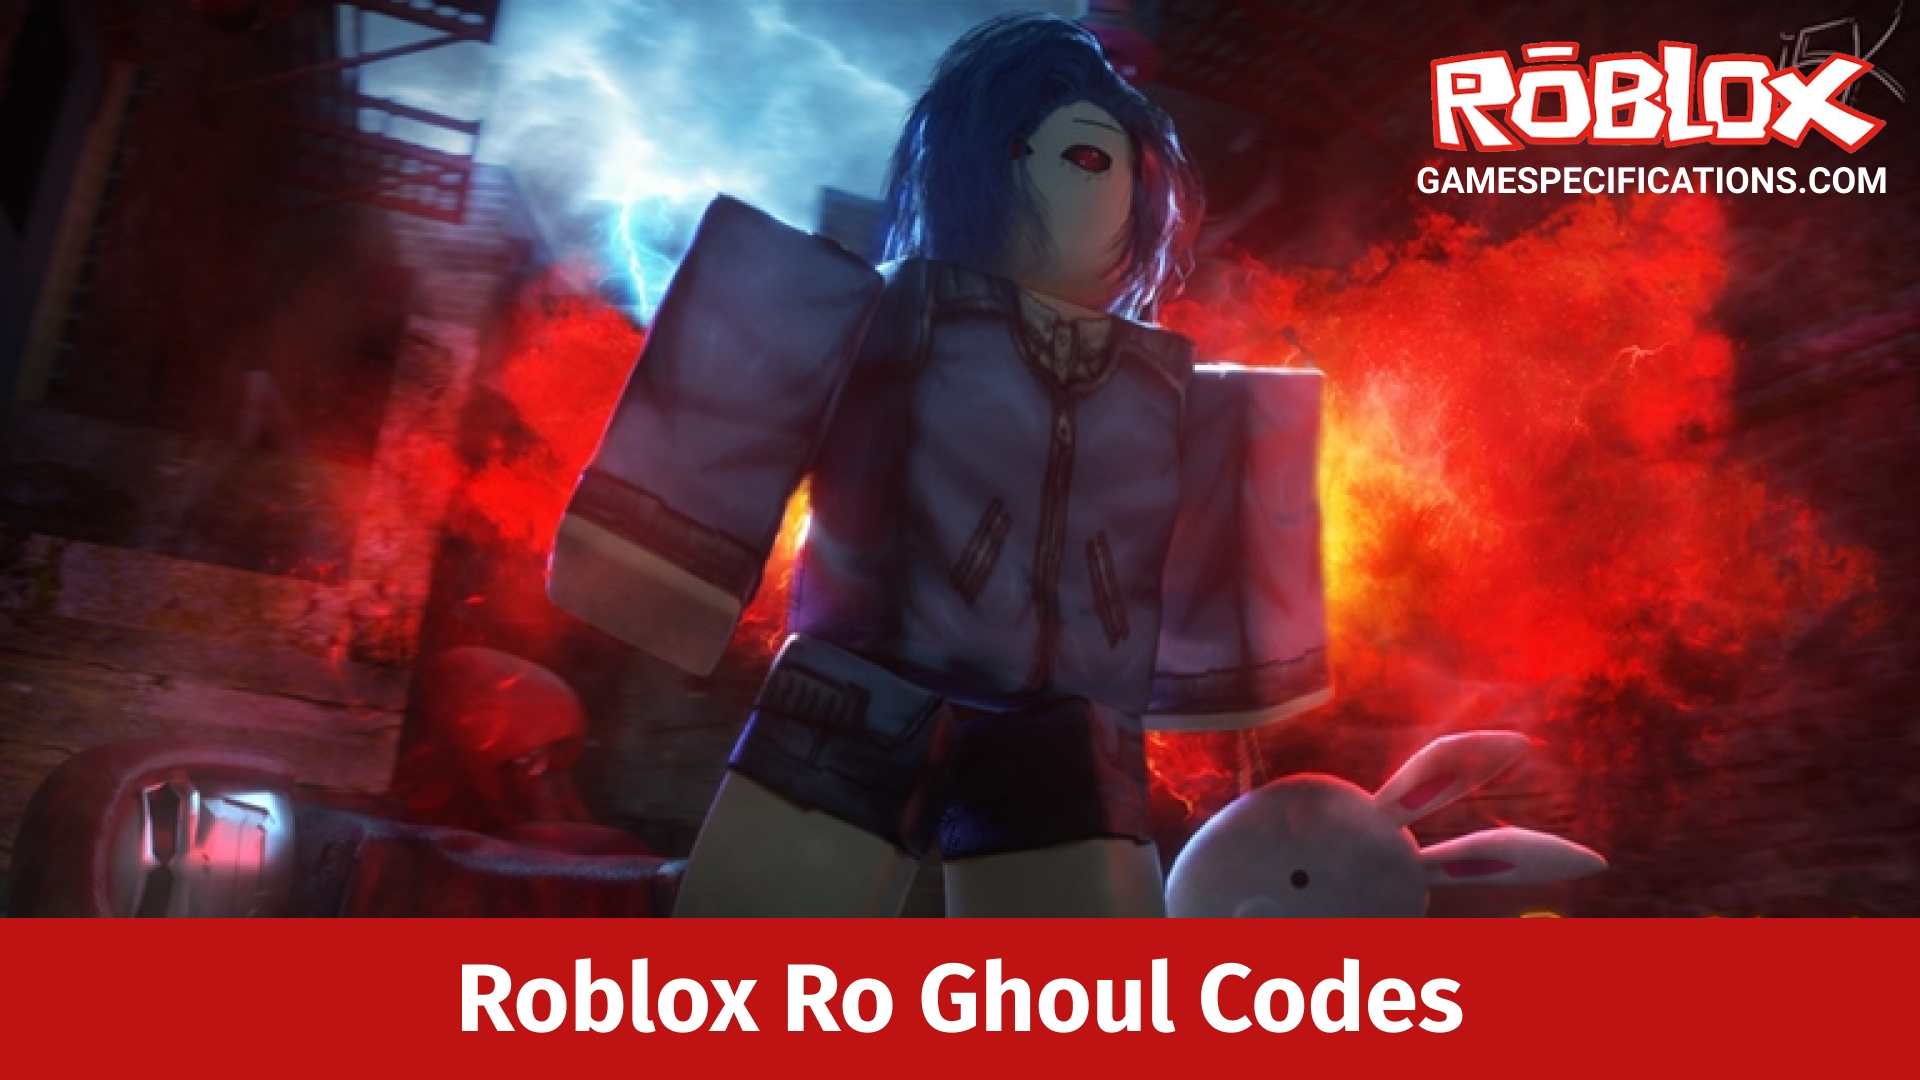 Roblox Ro Ghoul Codes July 2021 Game Specifications - roblox health changed